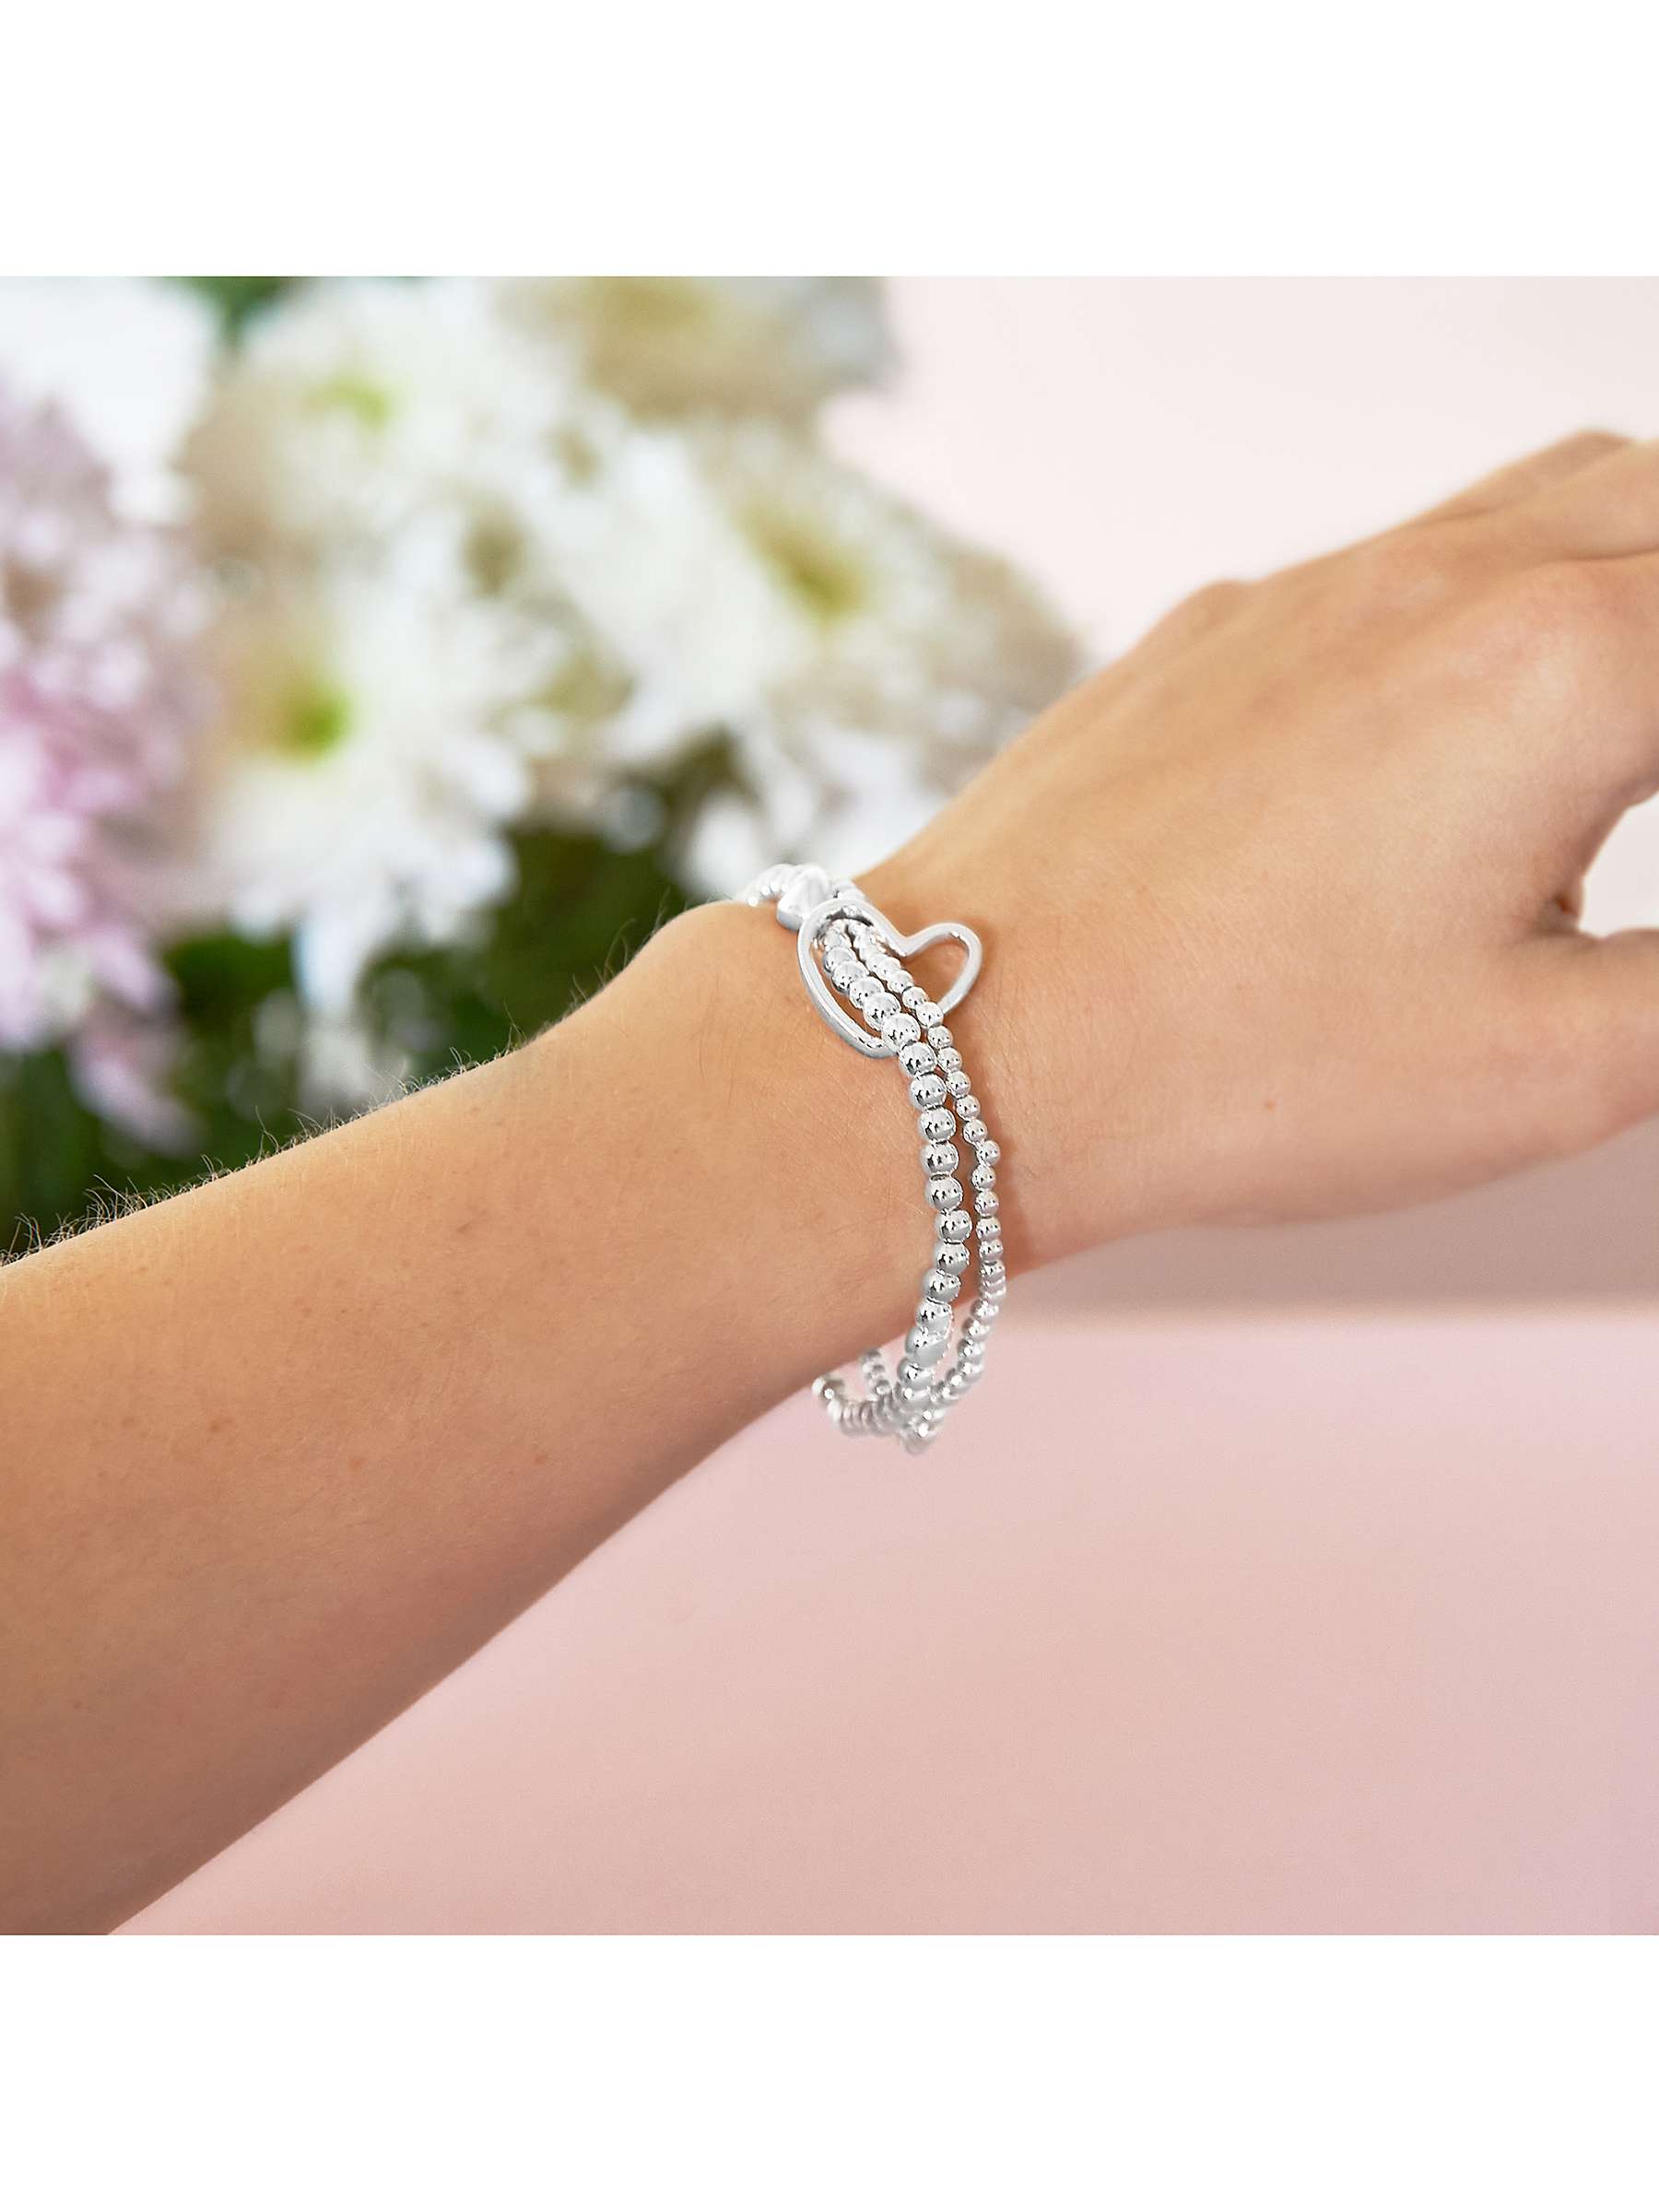 Buy Joma Jewellery Lila White Pearl Polished Bead Bracelet, Silver Online at johnlewis.com